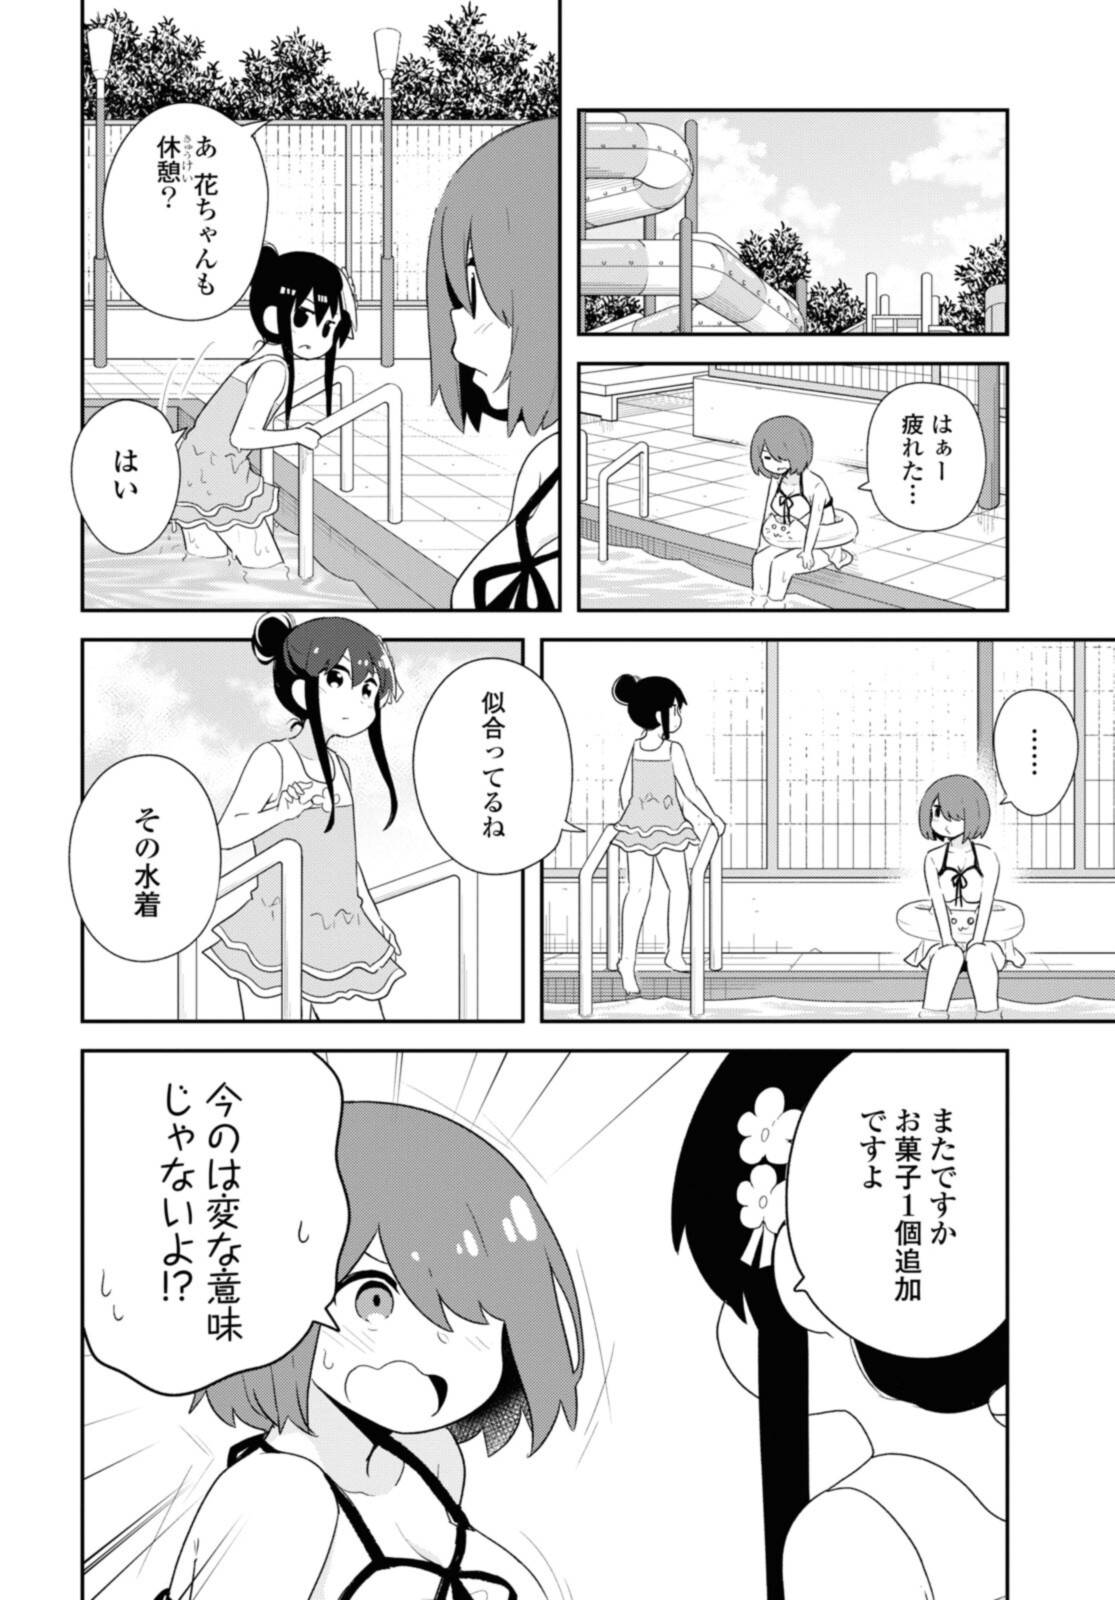 Wataten! An Angel Flew Down to Me 私に天使が舞い降りた！ 第94.2話 - Page 8